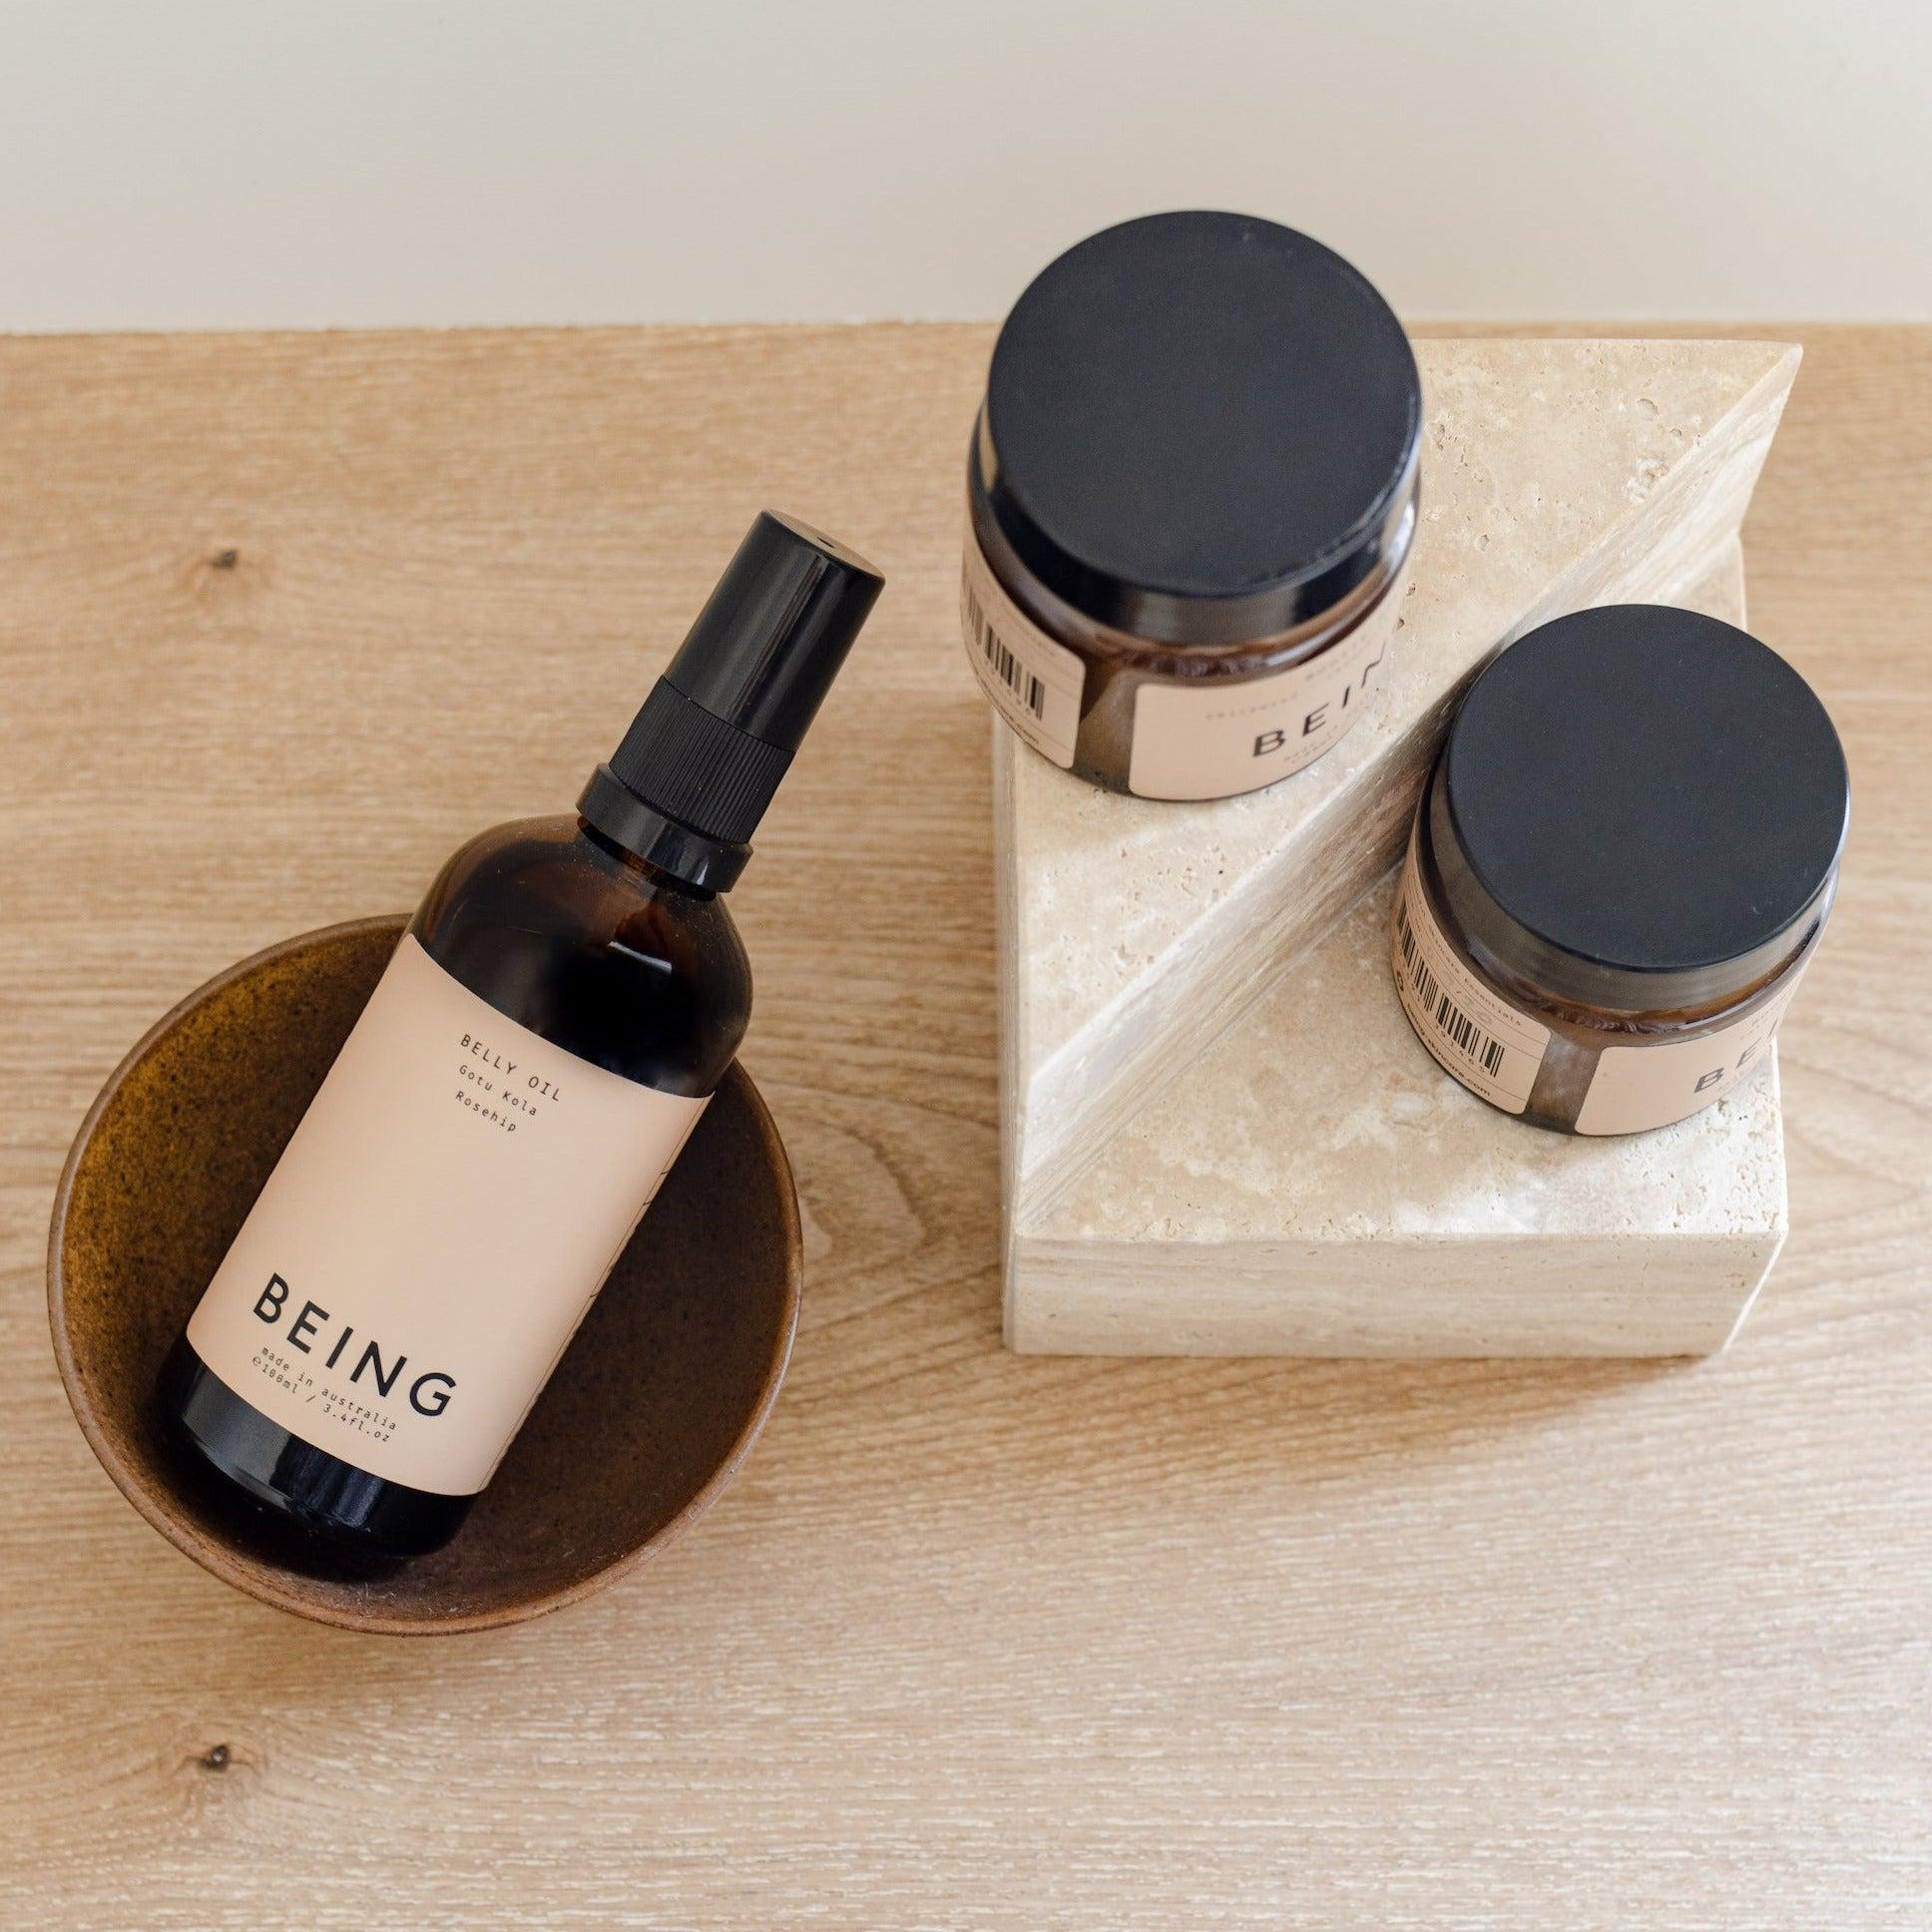 A mama & babe complete set from Being Skincare, including a bottle and bowl, displayed on a wooden table.